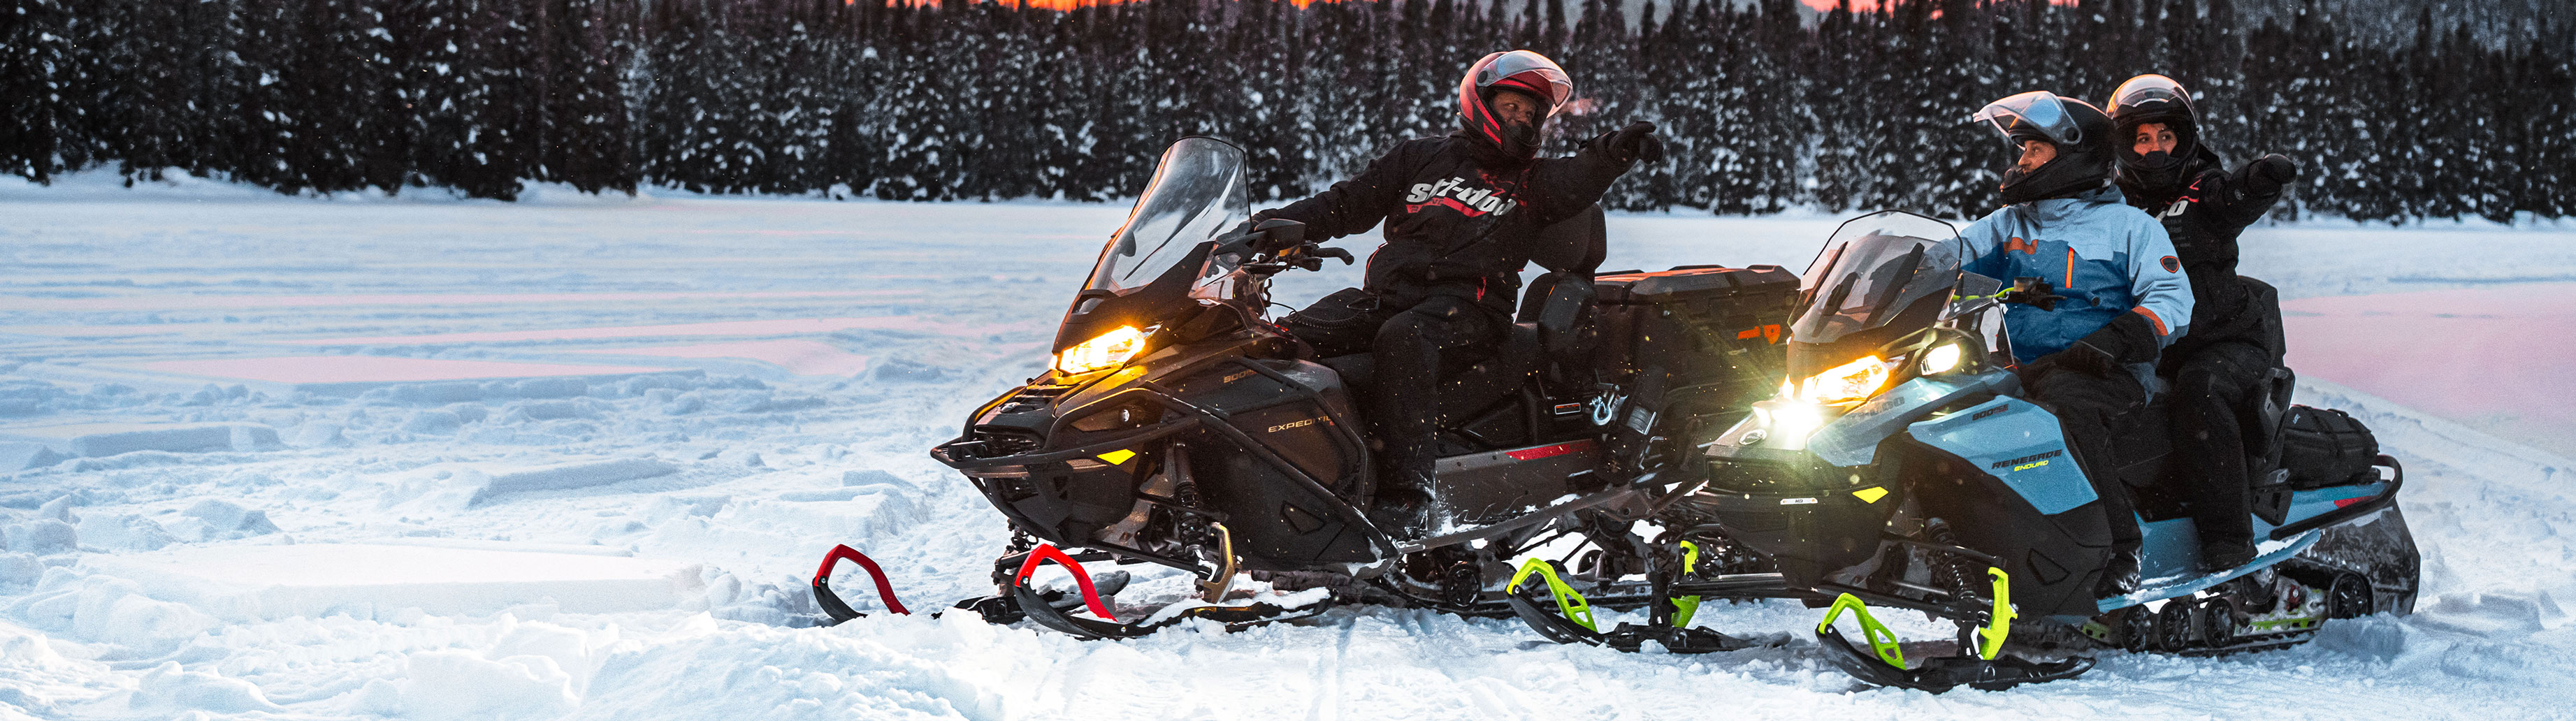 HOW CAN I FIND PEOPLE TO SNOWMOBILE WITH?